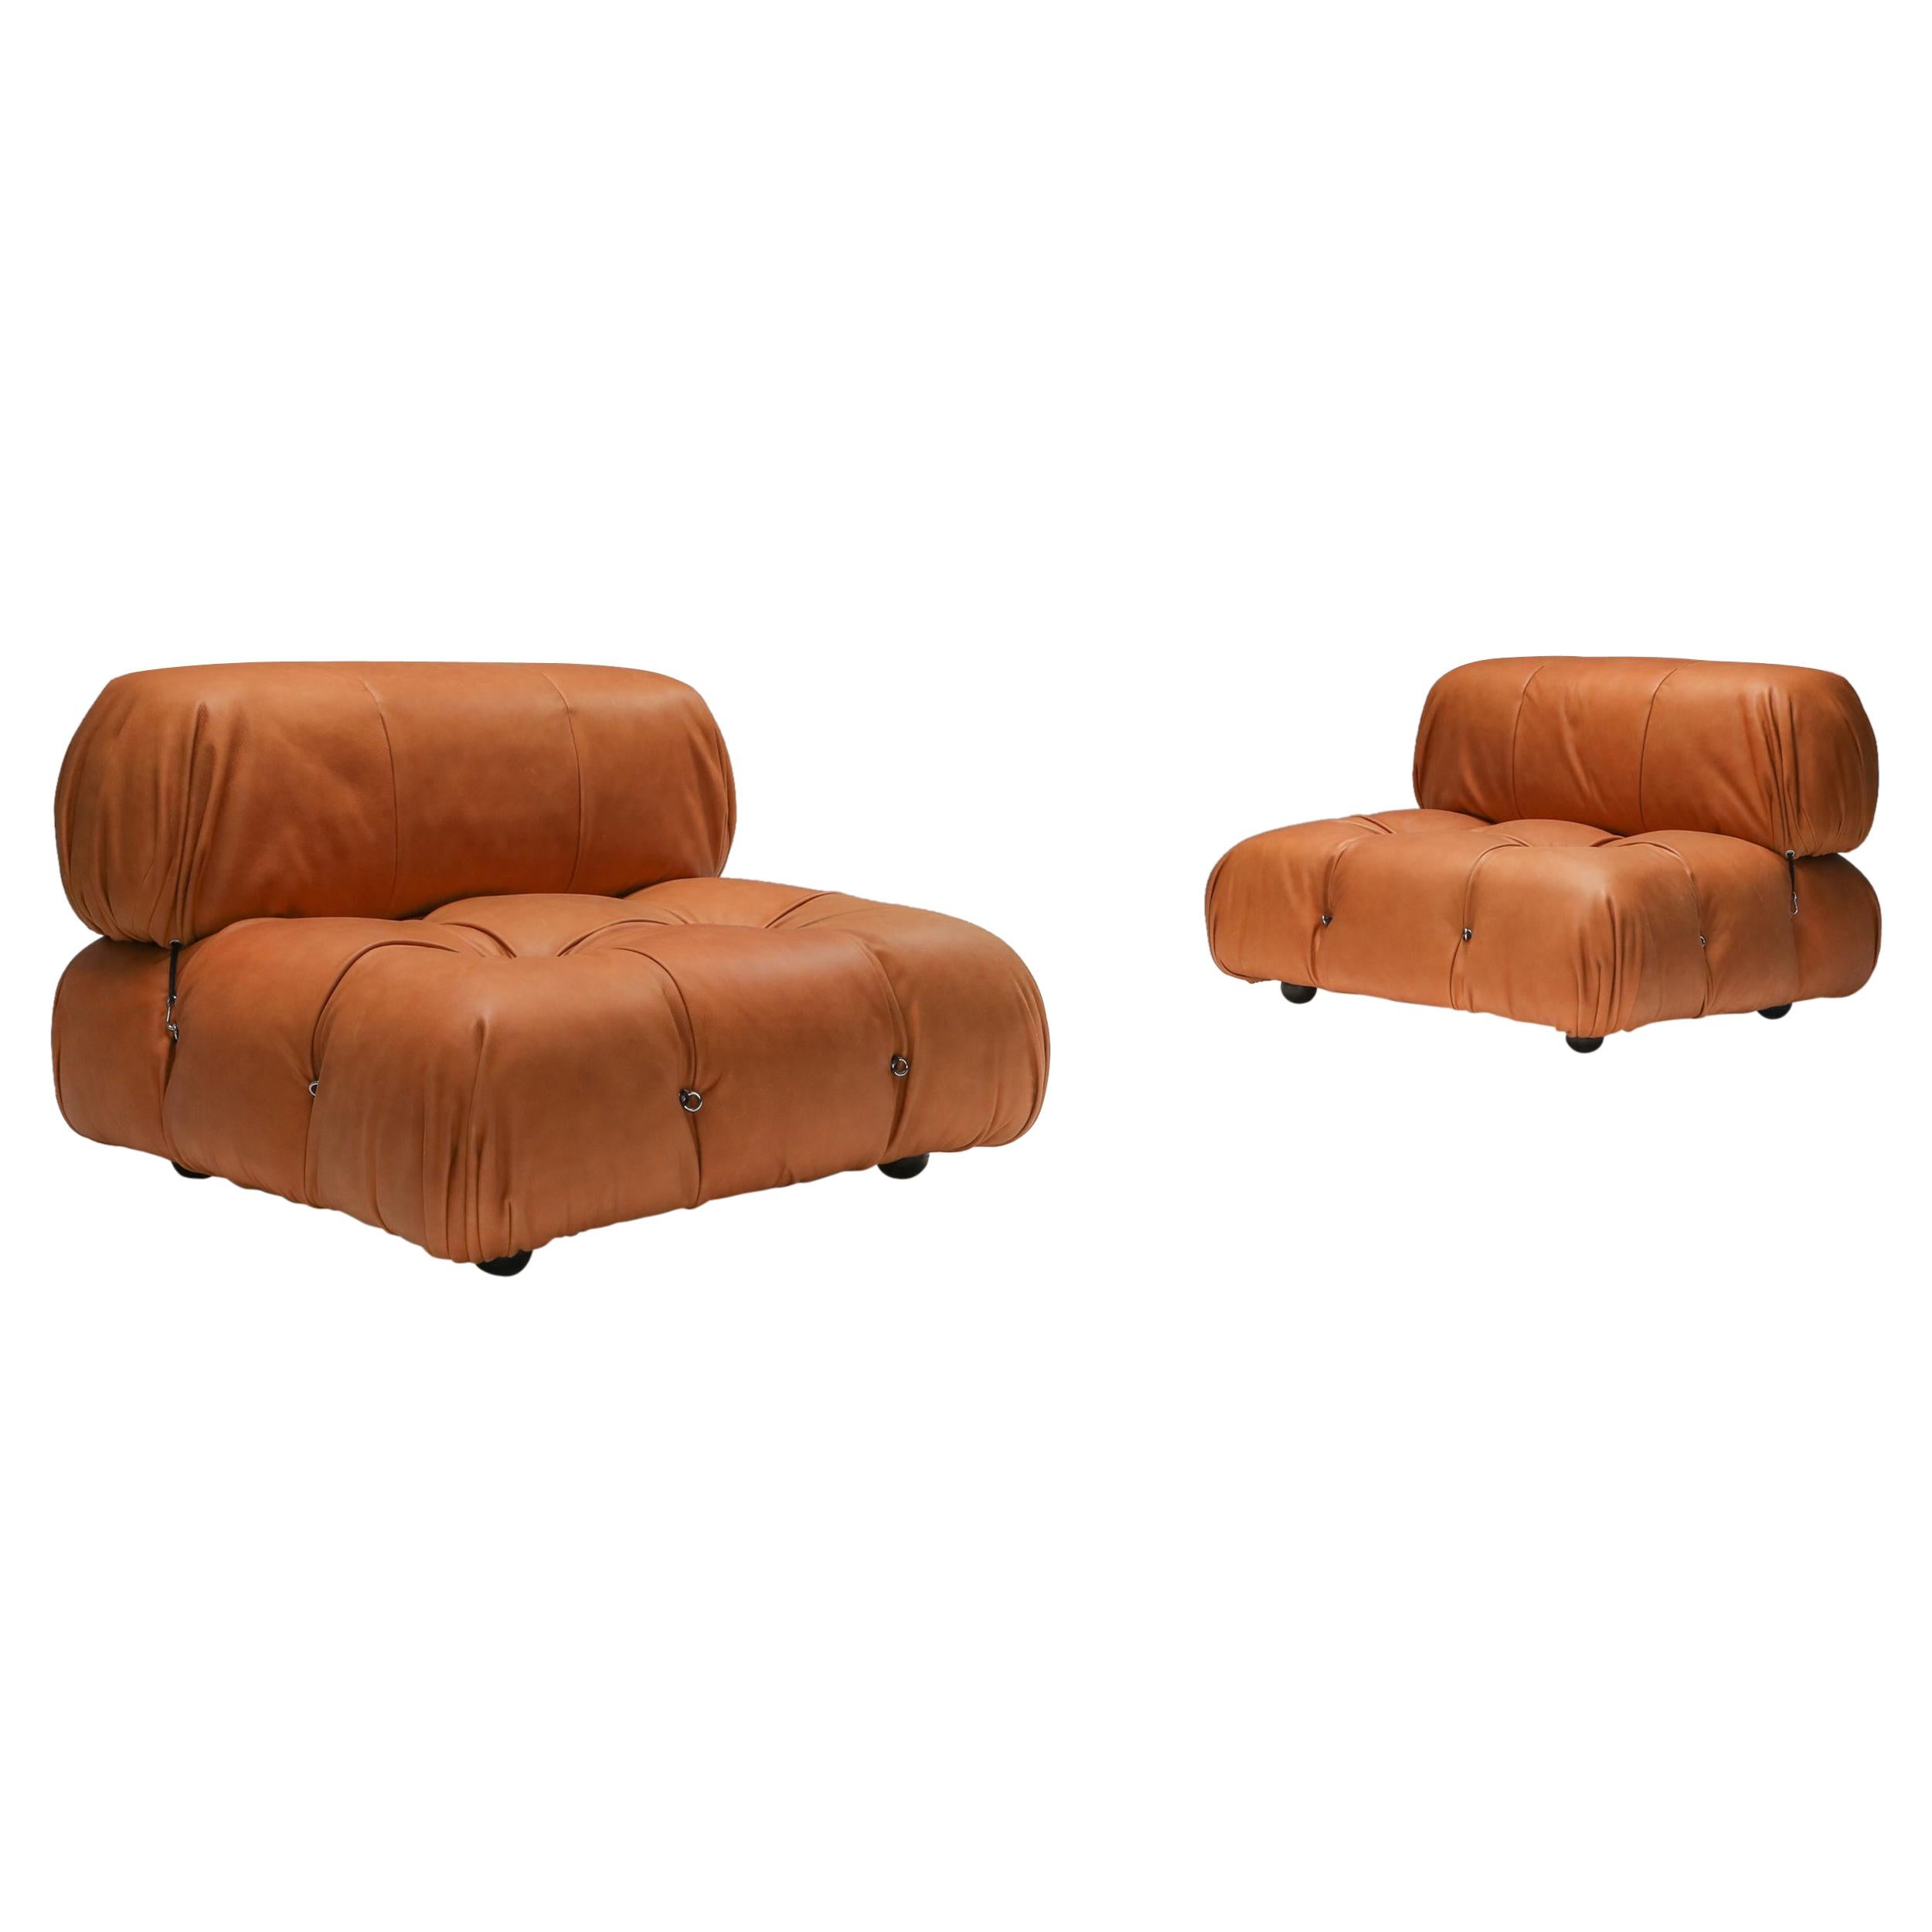 Camaleonda Lounge Chairs in New Cognac Leather by Mario Bellini